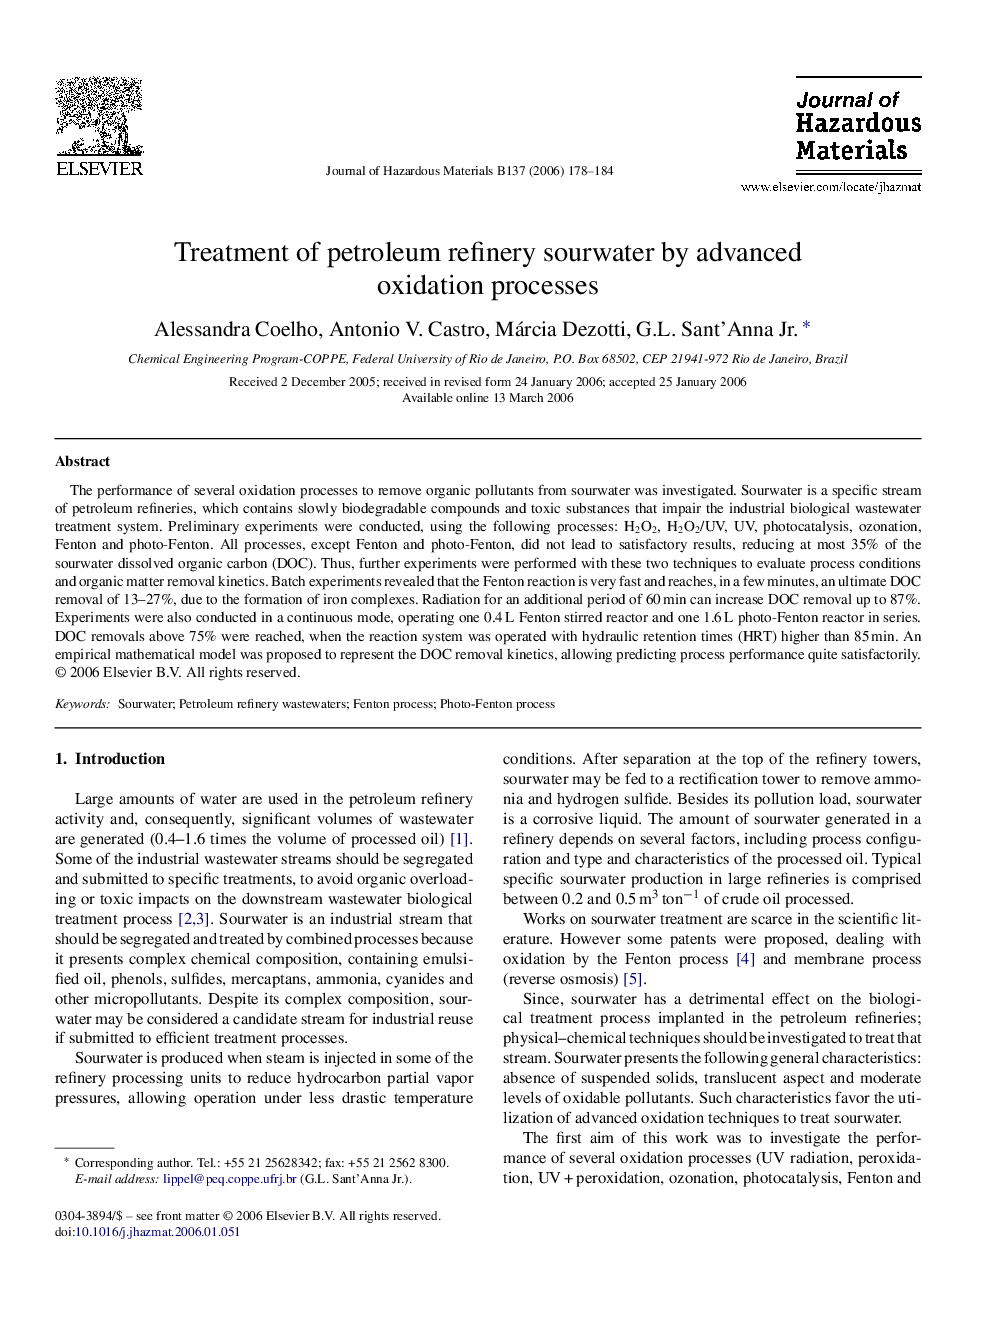 Treatment of petroleum refinery sourwater by advanced oxidation processes